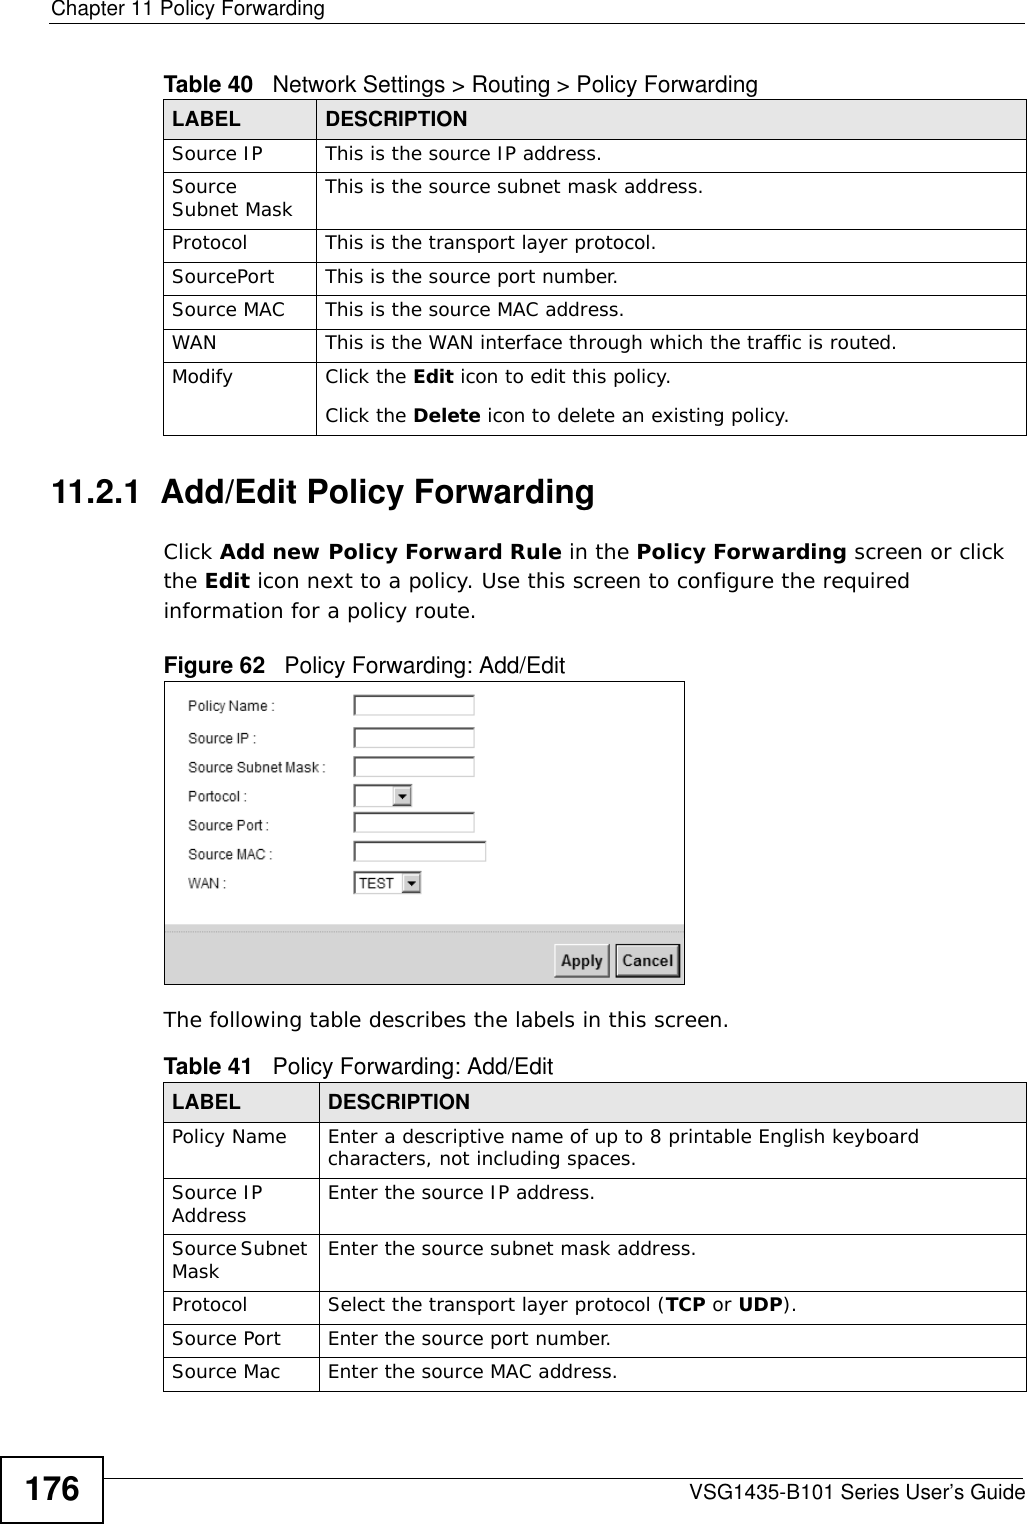 Chapter 11 Policy ForwardingVSG1435-B101 Series User’s Guide17611.2.1  Add/Edit Policy Forwarding   Click Add new Policy Forward Rule in the Policy Forwarding screen or click the Edit icon next to a policy. Use this screen to configure the required information for a policy route. Figure 62   Policy Forwarding: Add/Edit The following table describes the labels in this screen. Source IP This is the source IP address.Source Subnet Mask This is the source subnet mask address.Protocol This is the transport layer protocol.SourcePort This is the source port number.Source MAC This is the source MAC address.WAN This is the WAN interface through which the traffic is routed. Modify Click the Edit icon to edit this policy.Click the Delete icon to delete an existing policy. Table 40   Network Settings &gt; Routing &gt; Policy ForwardingLABEL DESCRIPTIONTable 41   Policy Forwarding: Add/EditLABEL DESCRIPTIONPolicy Name Enter a descriptive name of up to 8 printable English keyboard characters, not including spaces. Source IP Address Enter the source IP address.Source Subnet Mask Enter the source subnet mask address.Protocol Select the transport layer protocol (TCP or UDP).Source Port Enter the source port number. Source Mac  Enter the source MAC address. 